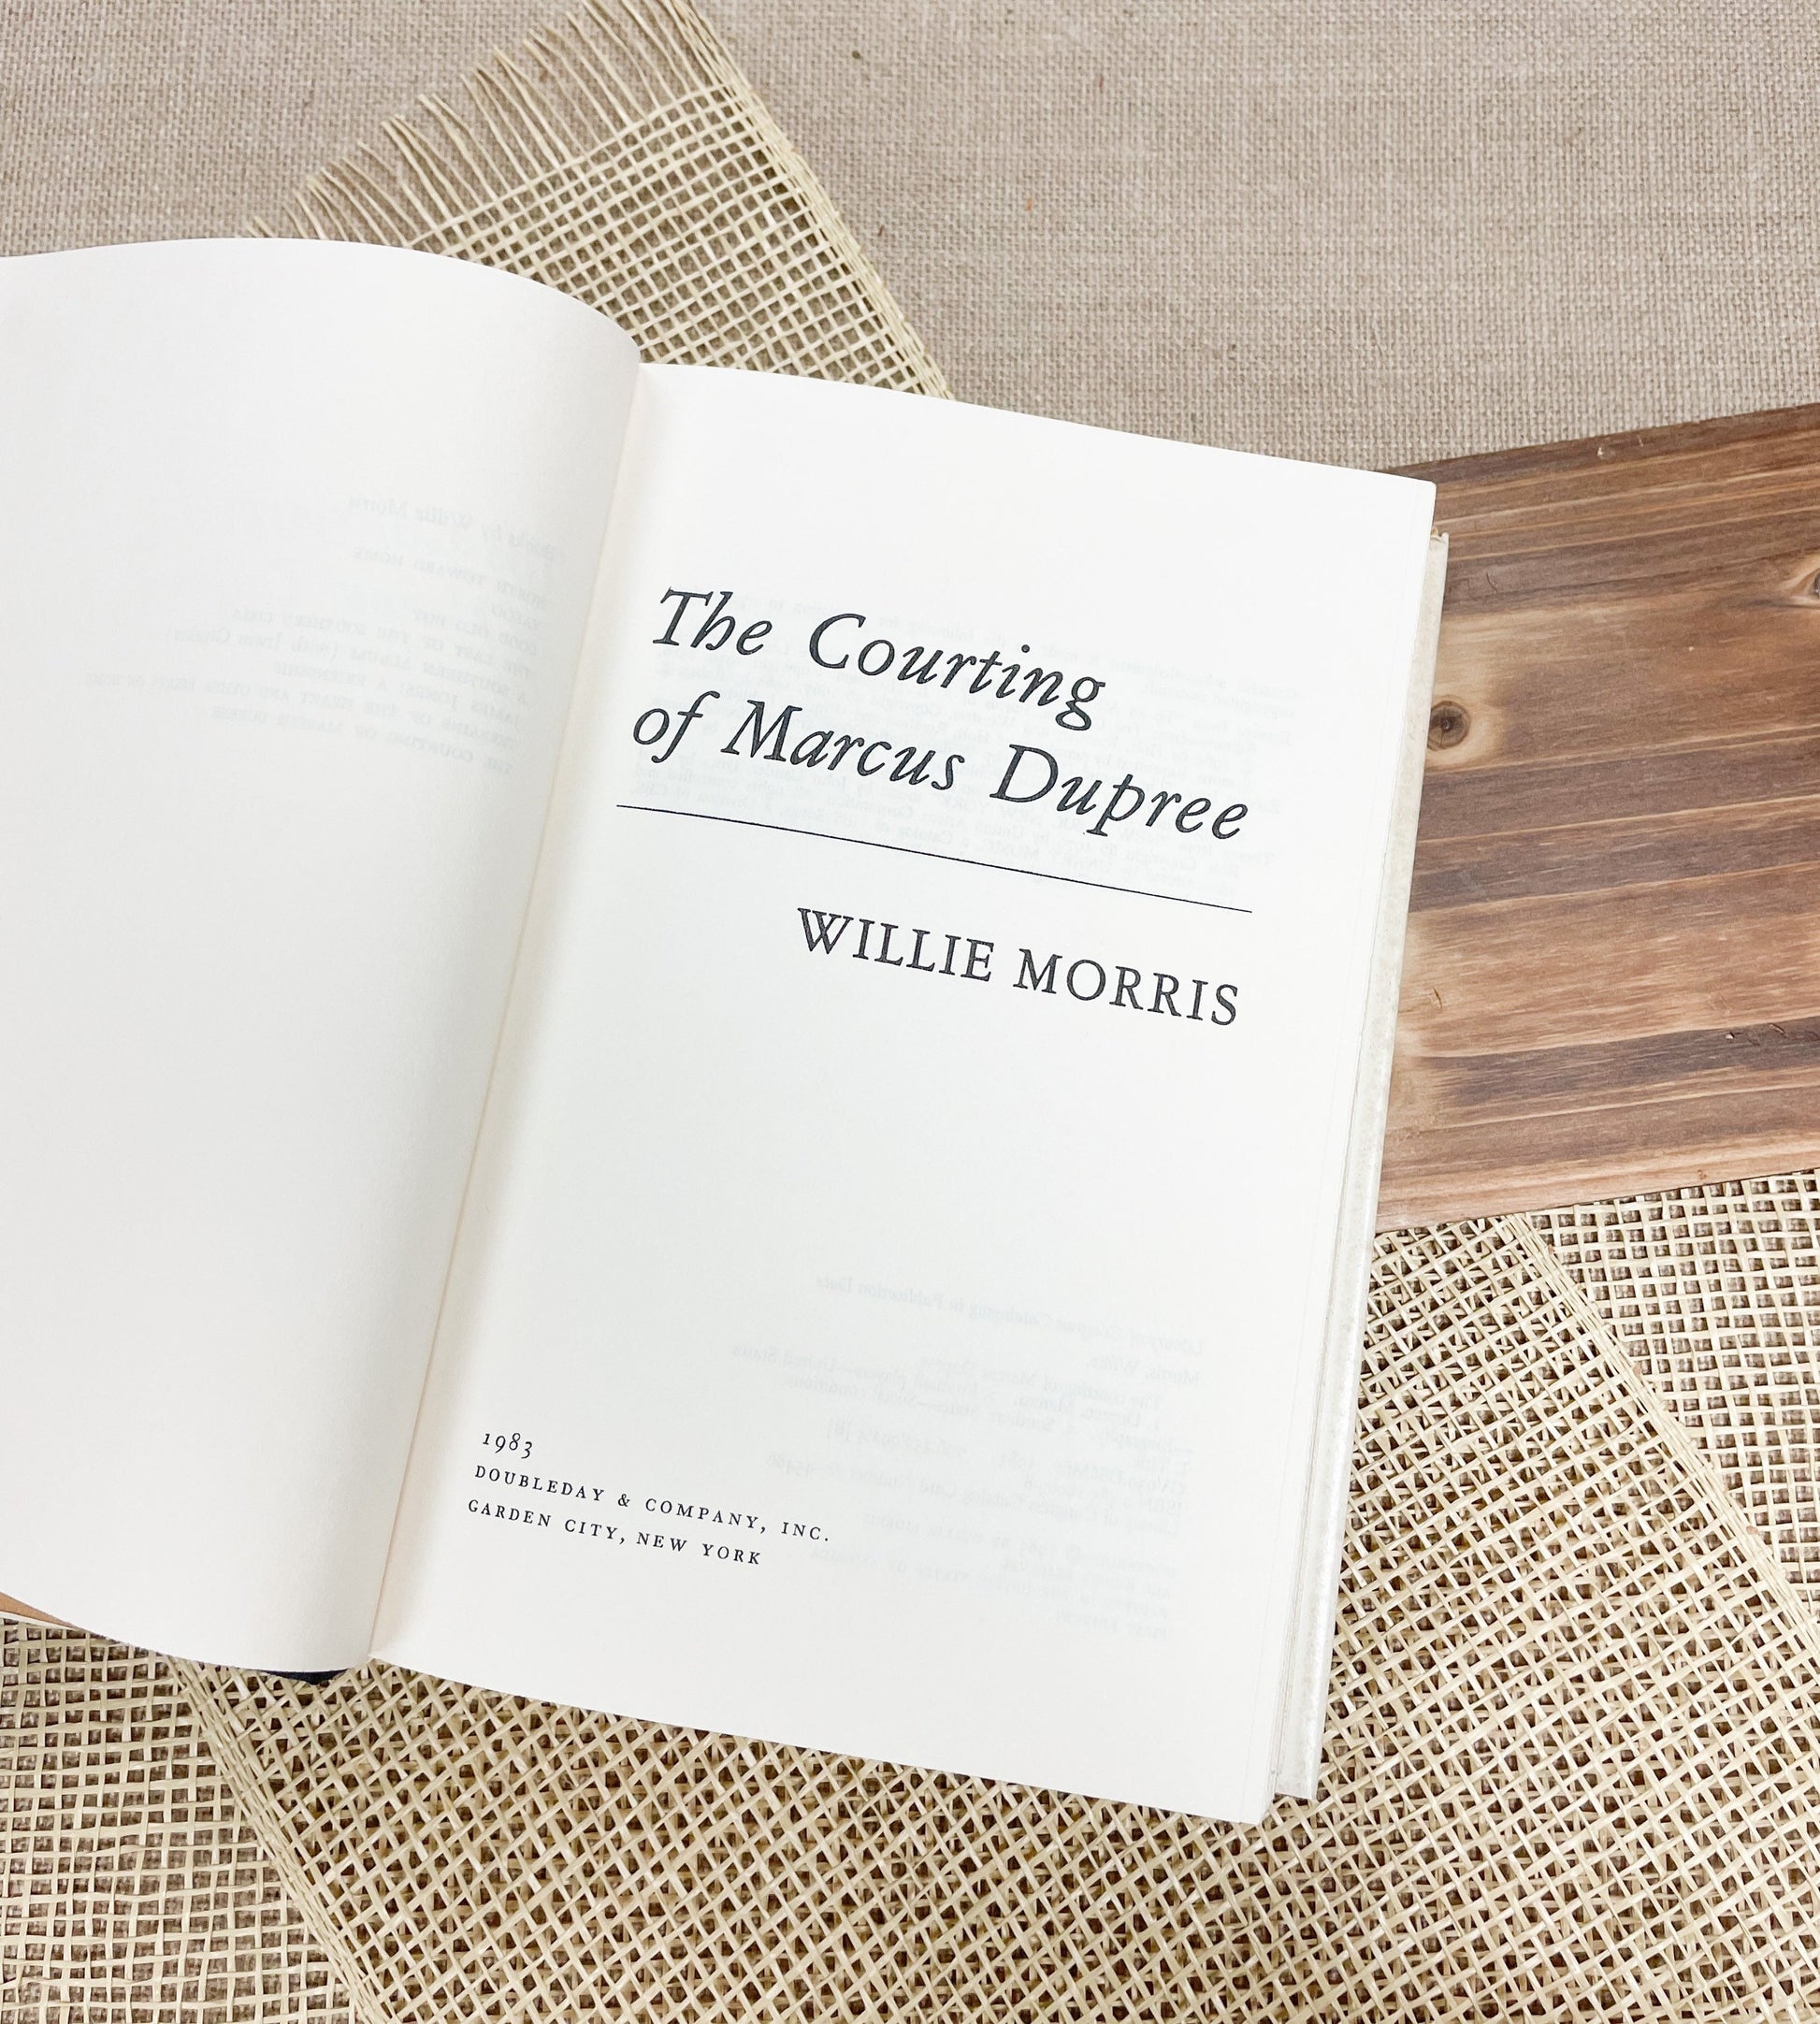 First Edition Non-Fiction Book, The Courting of Marcus Dupree by Willie Morris